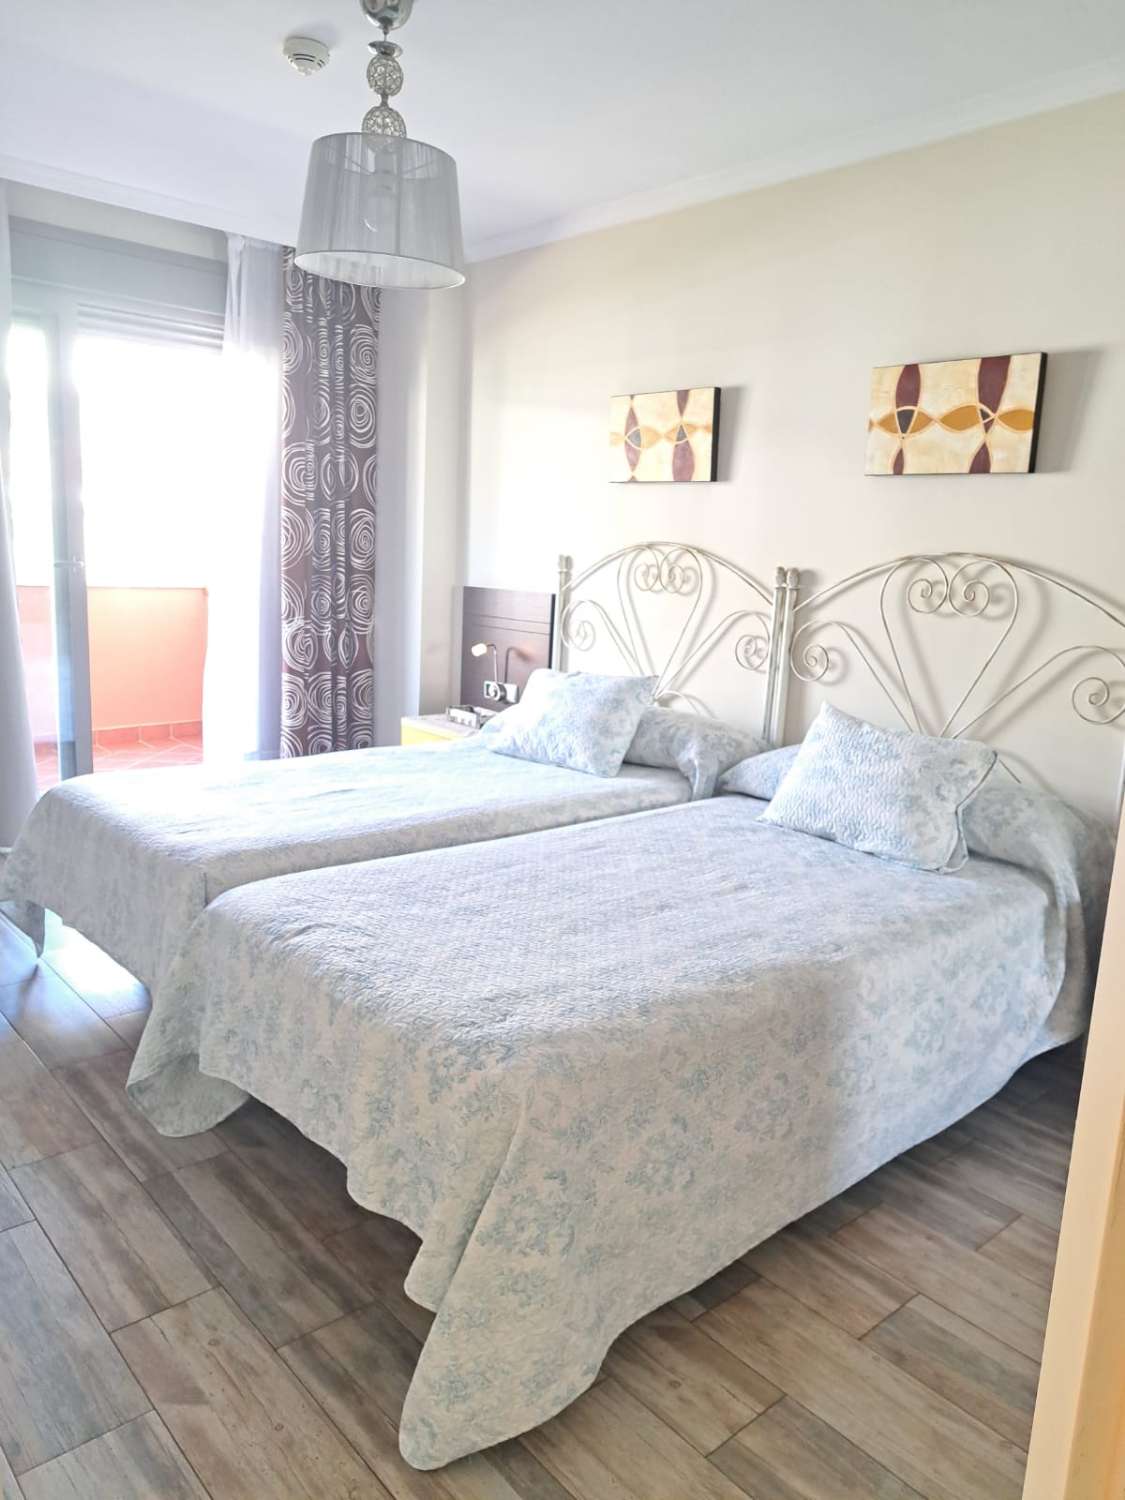 NICE ONE-BEDROOM APARTMENT 200 METERS FROM THE BEACH